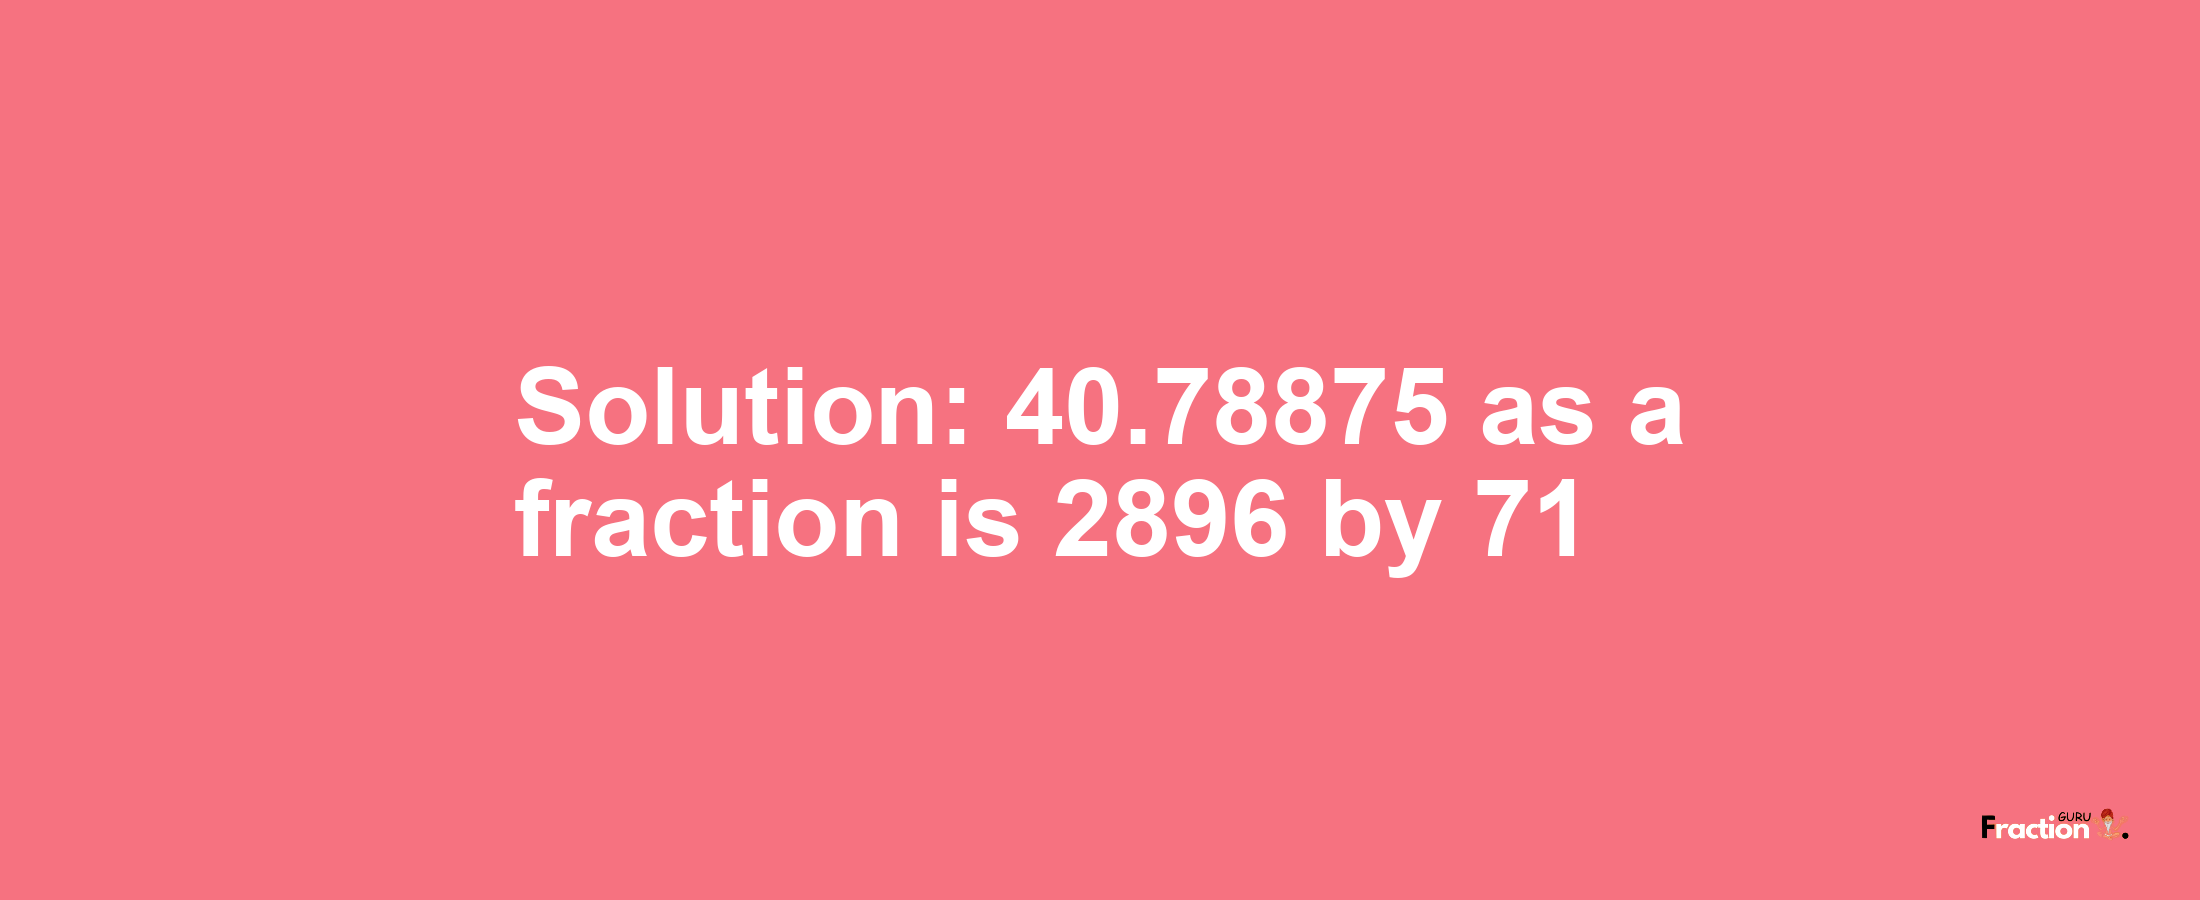 Solution:40.78875 as a fraction is 2896/71